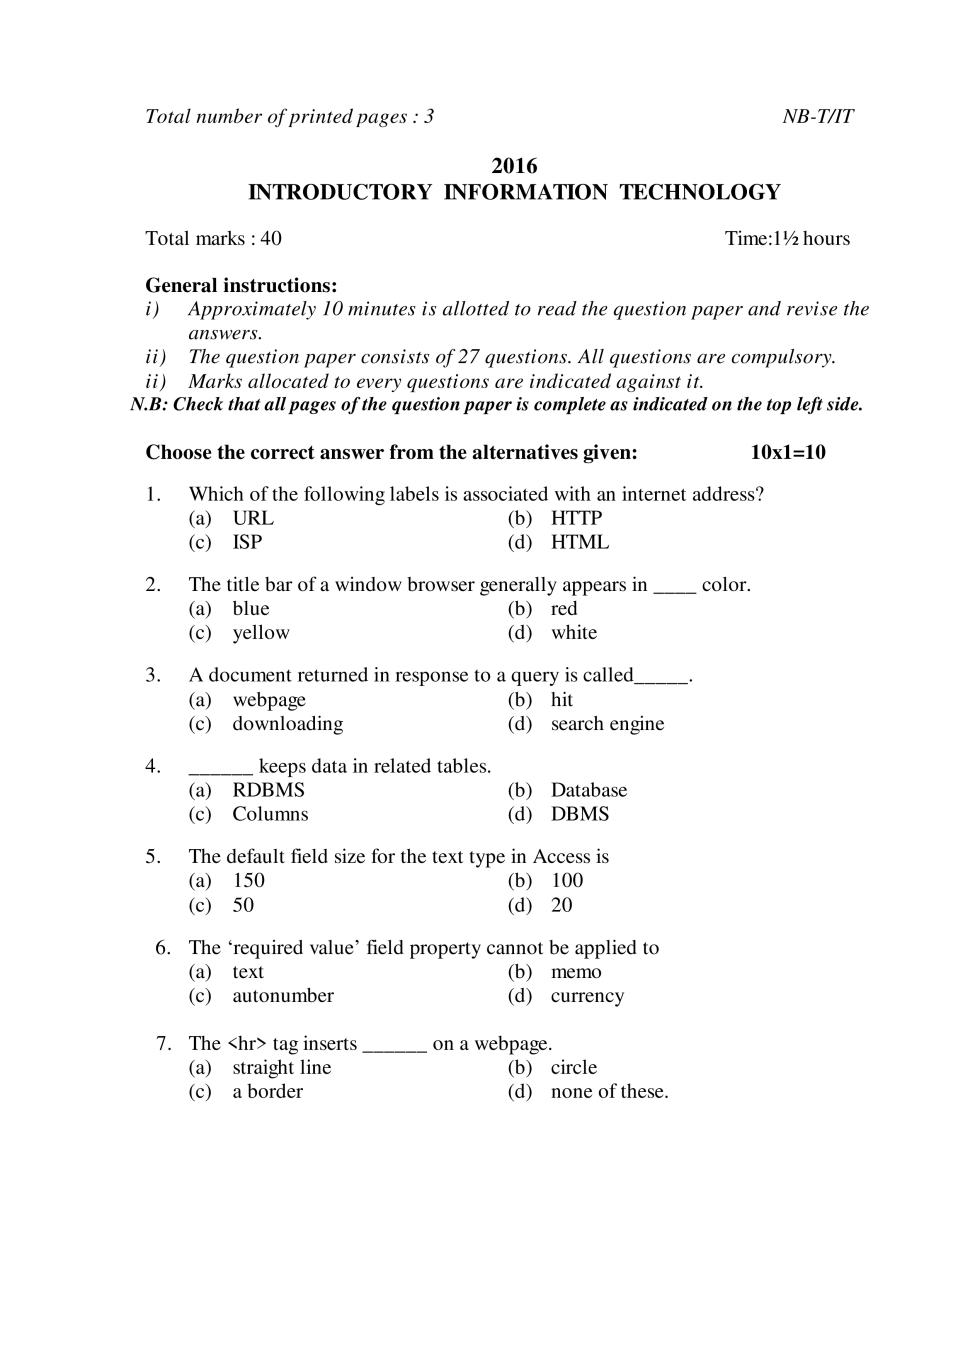 NBSE Class 10 Question Paper 2016 for Indian Institute of Technology - Page 1